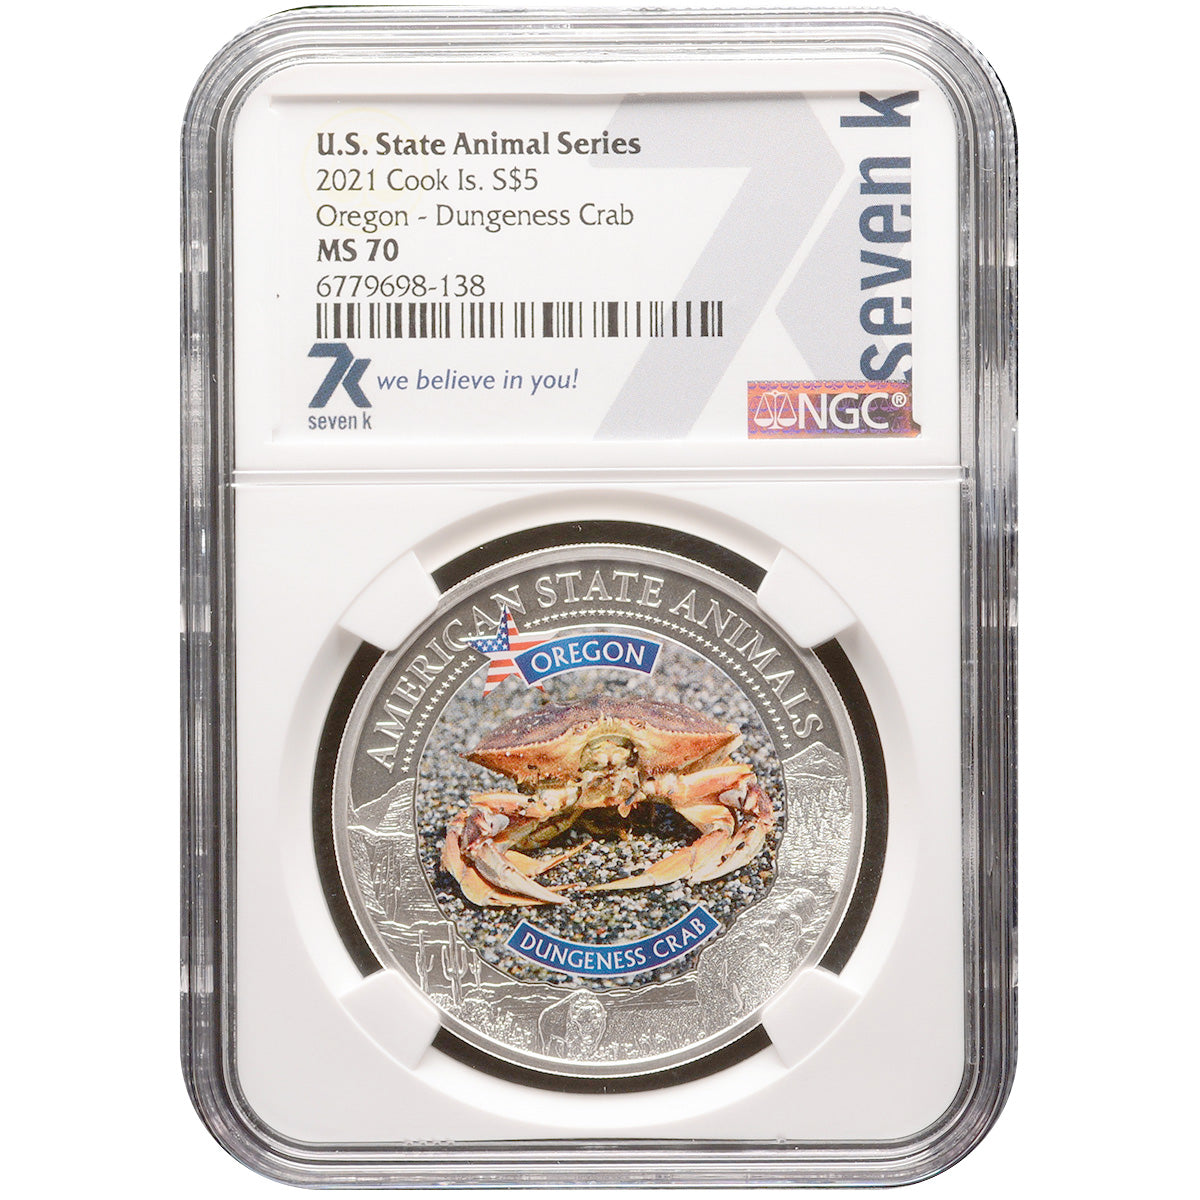 2021 Cook Islands OREGON DUNGENESS CRAB Graded MS70 American State Animals 1 Oz Silver Coin - OZB